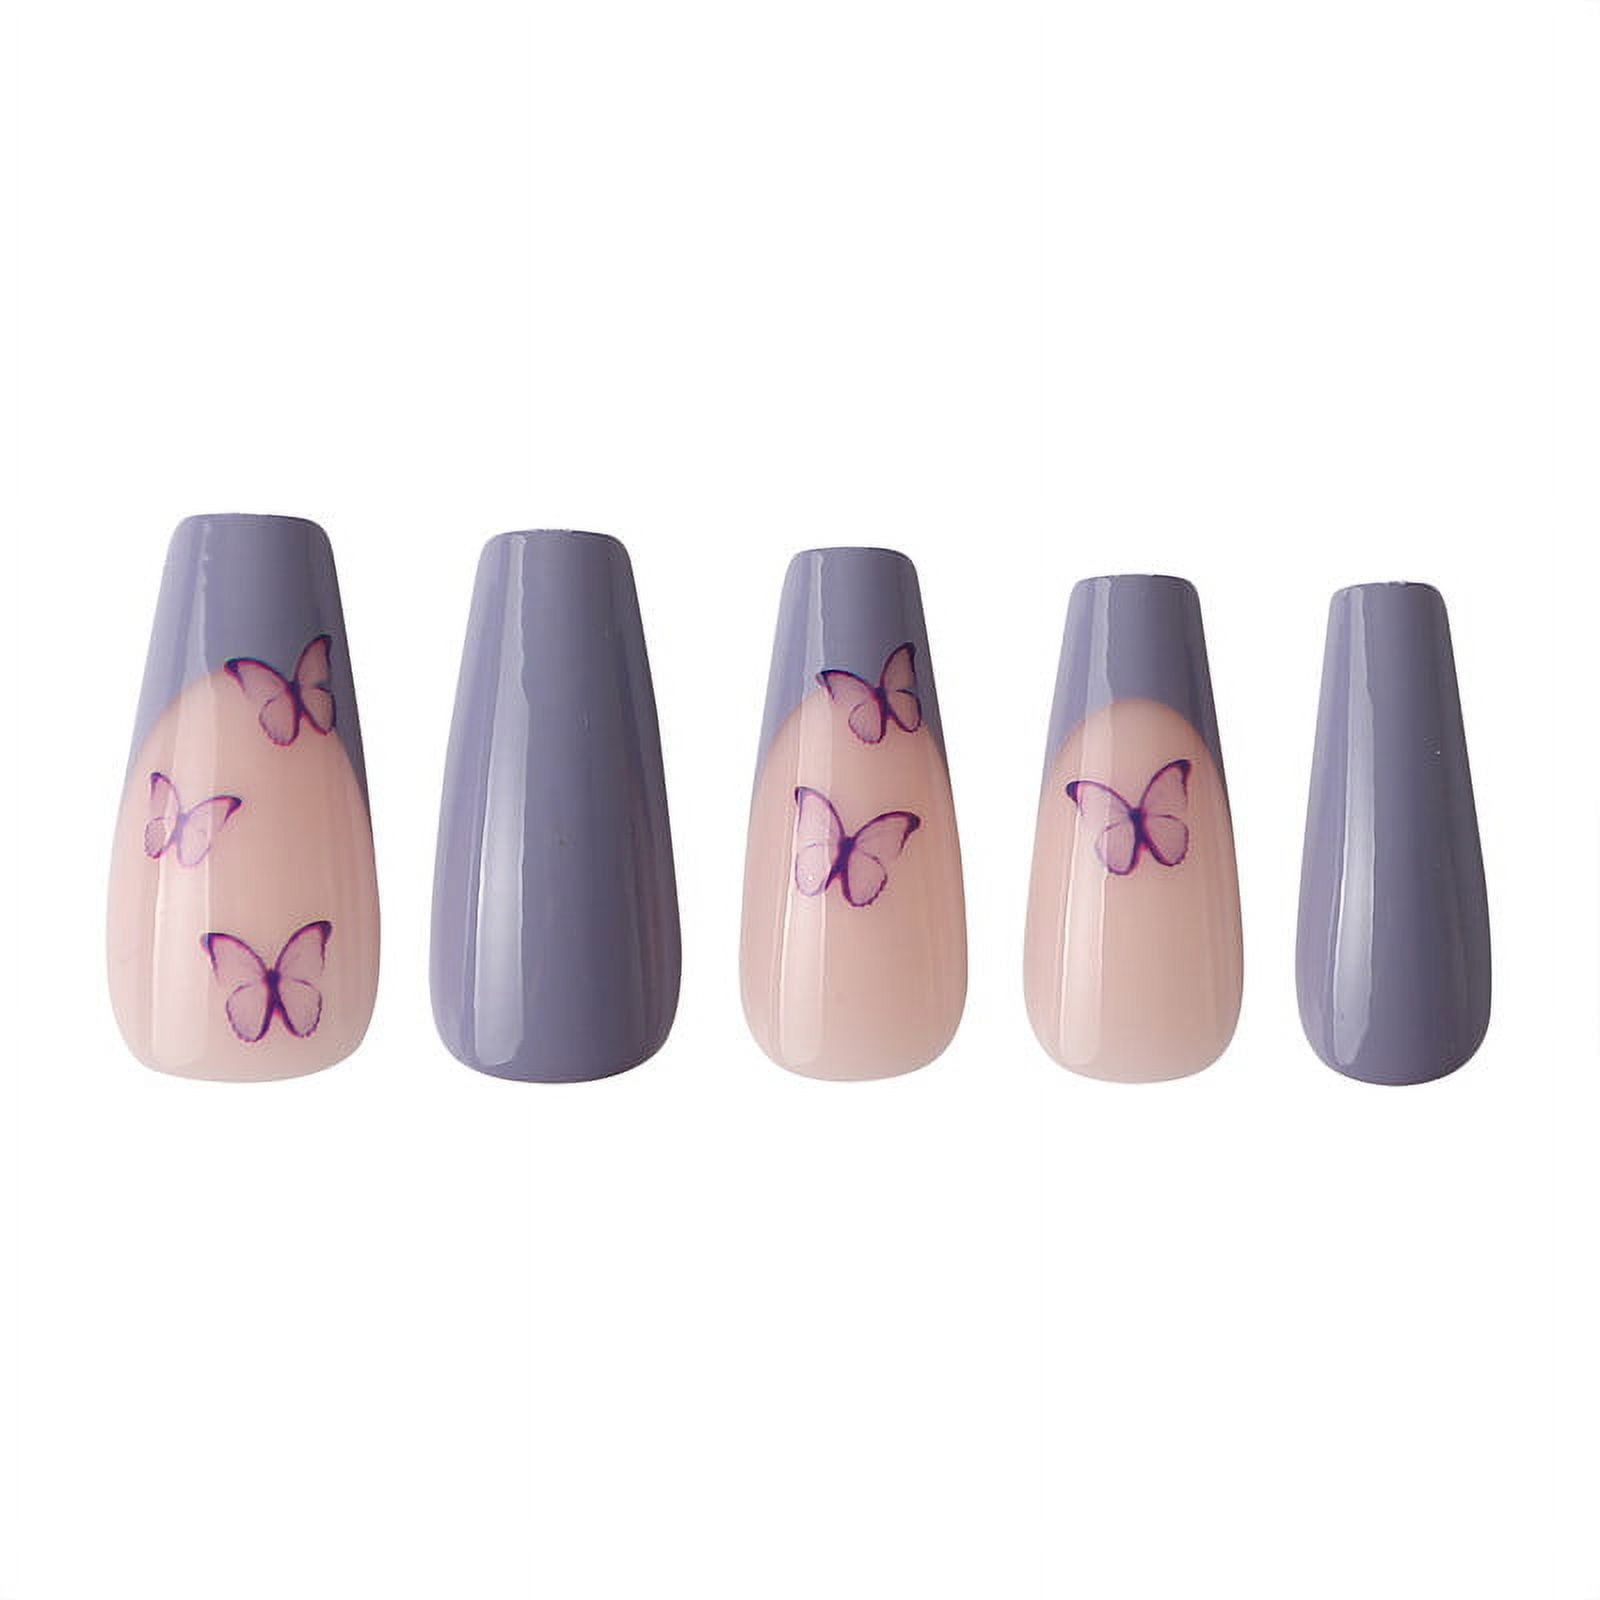 50 Beautiful Pastel Purple Nails For Your Next Manicure! For 2024 | Purple  nails, Purple glitter nails, Lavender nails